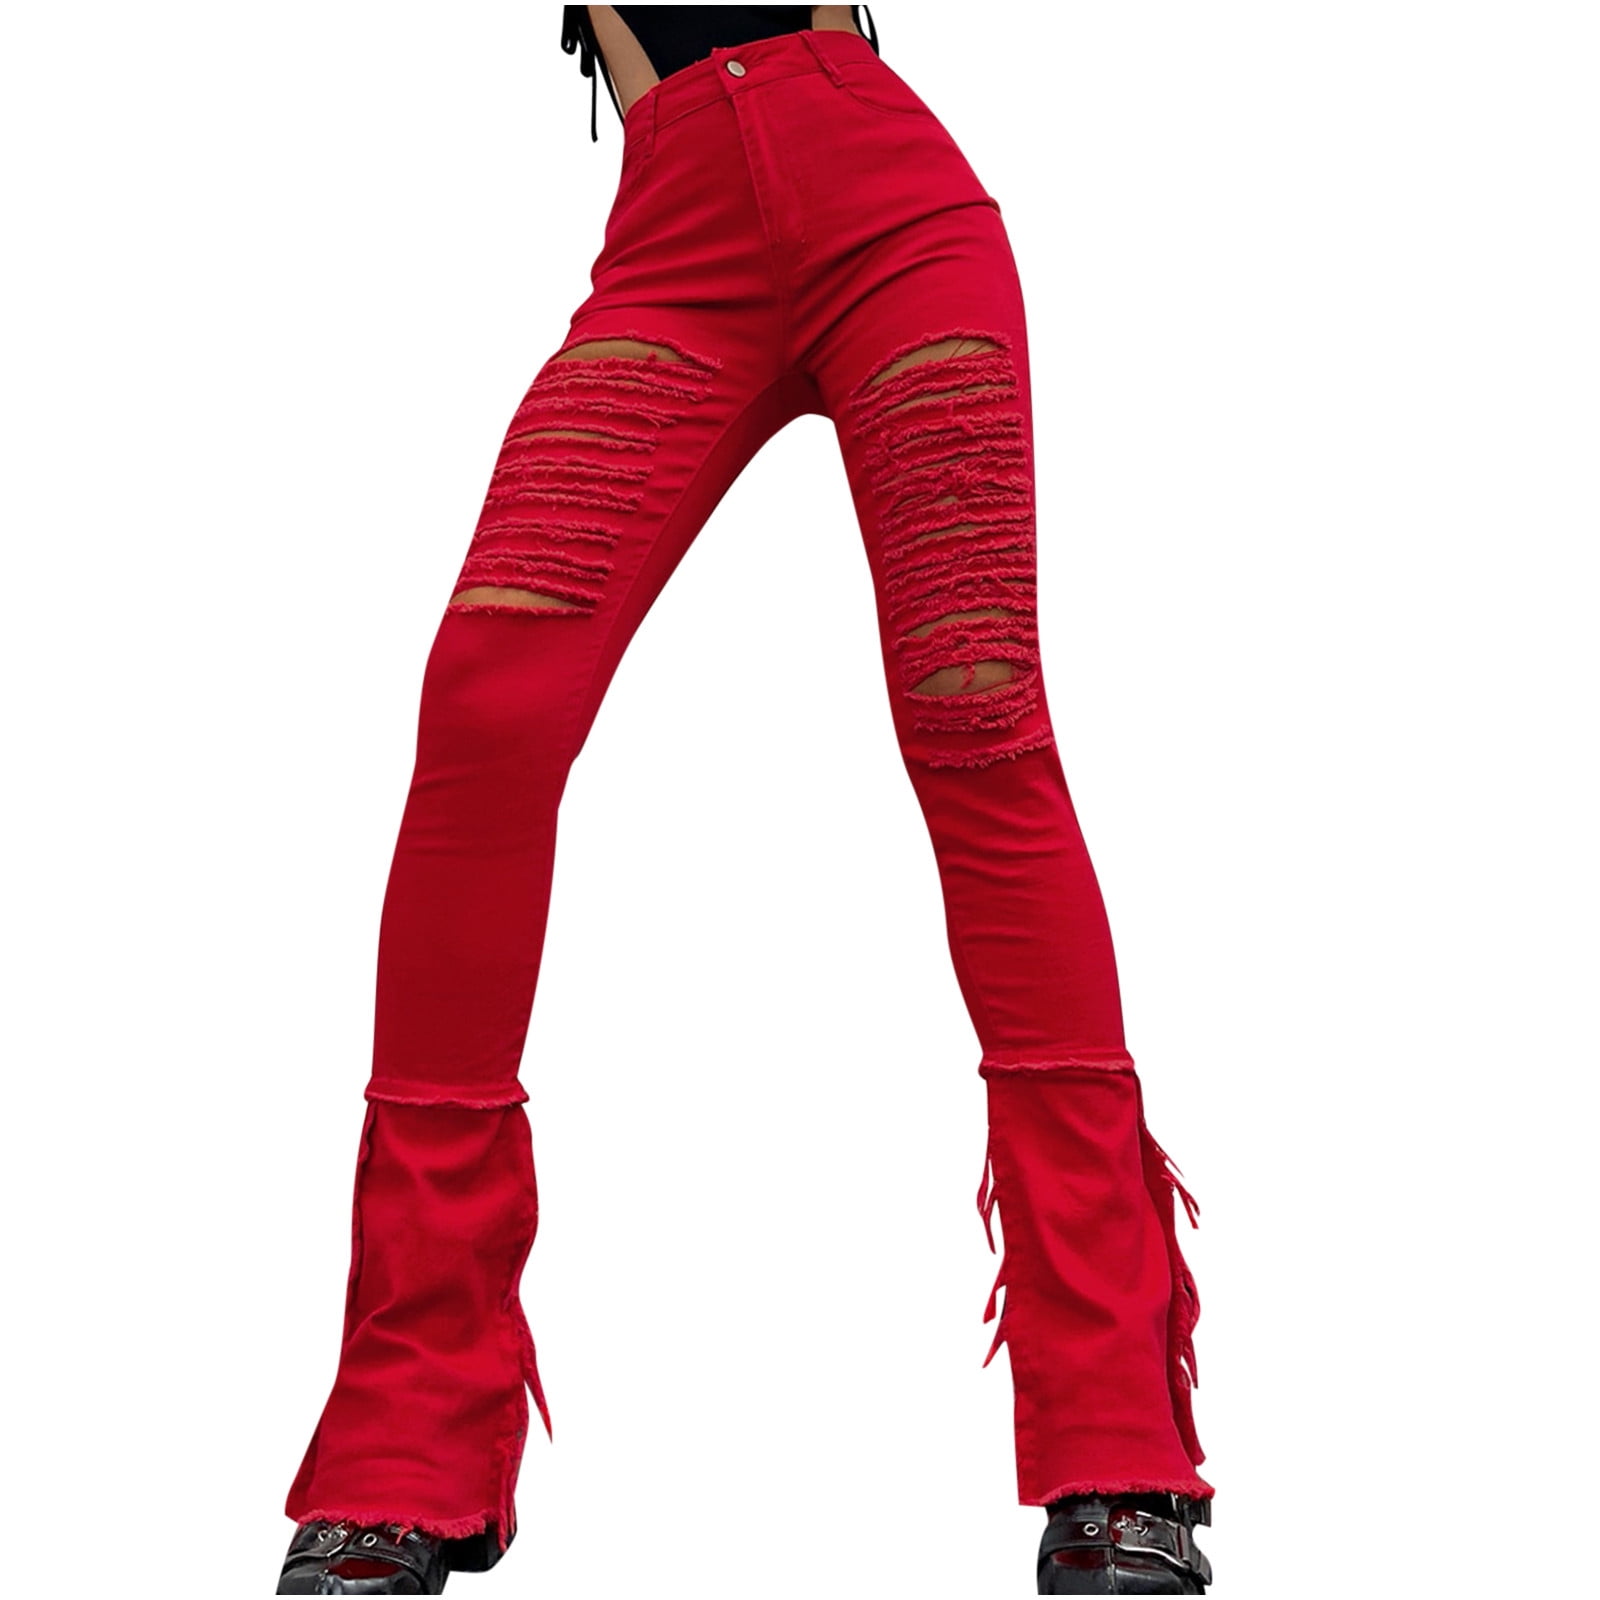 Ecqkame Women's Sweatpants Clearance Women's Fashion Casual Solid Elastic  Waist Trousers Long Straight Pants Red XL